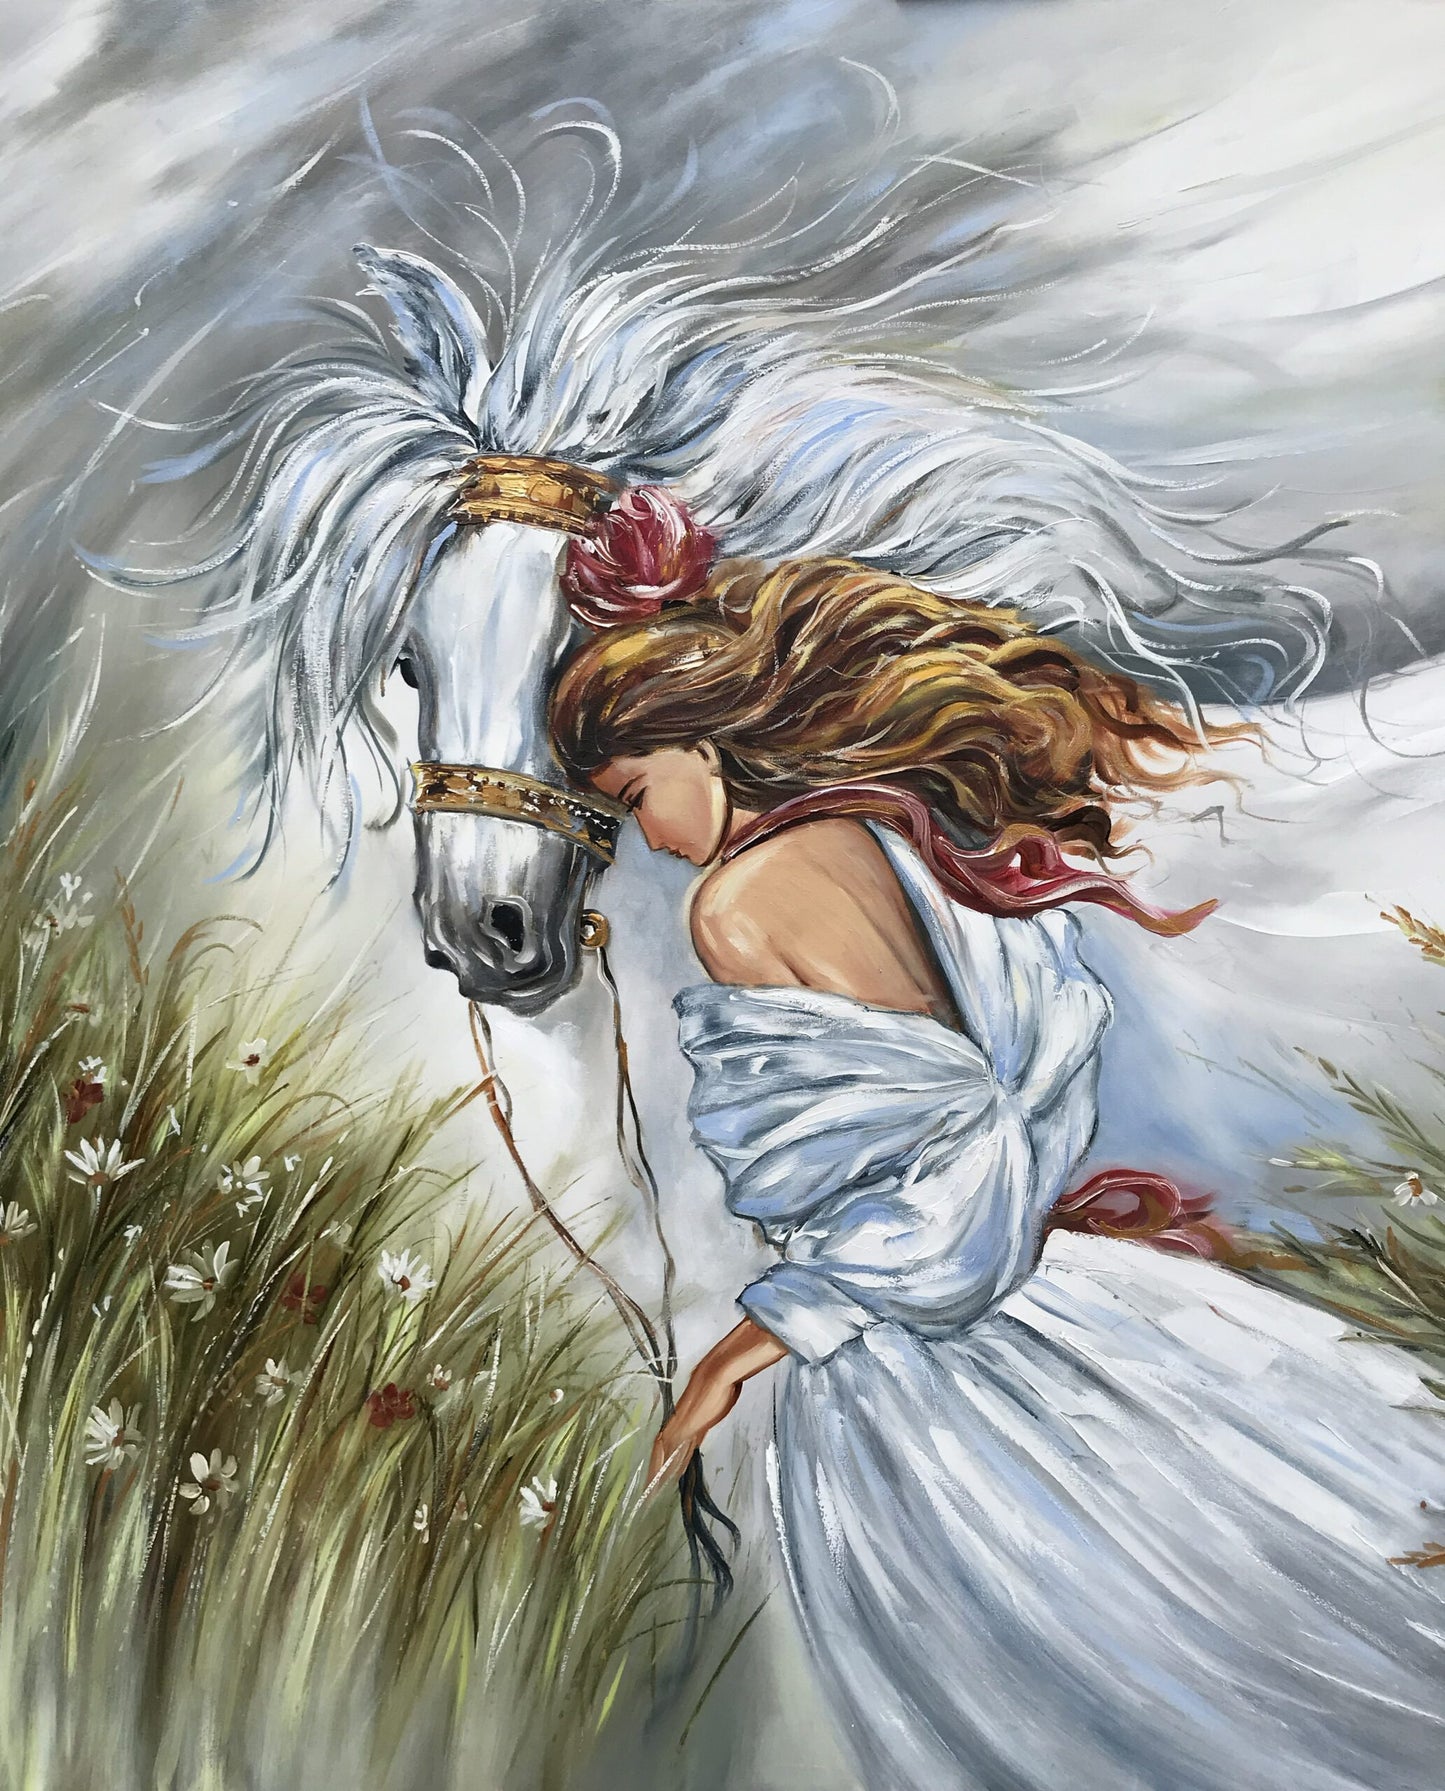 Woman with Horse Painting on Canvas White Horse Canvas Wall Art Girl and Horse Oil Painting Original Classic Artwork